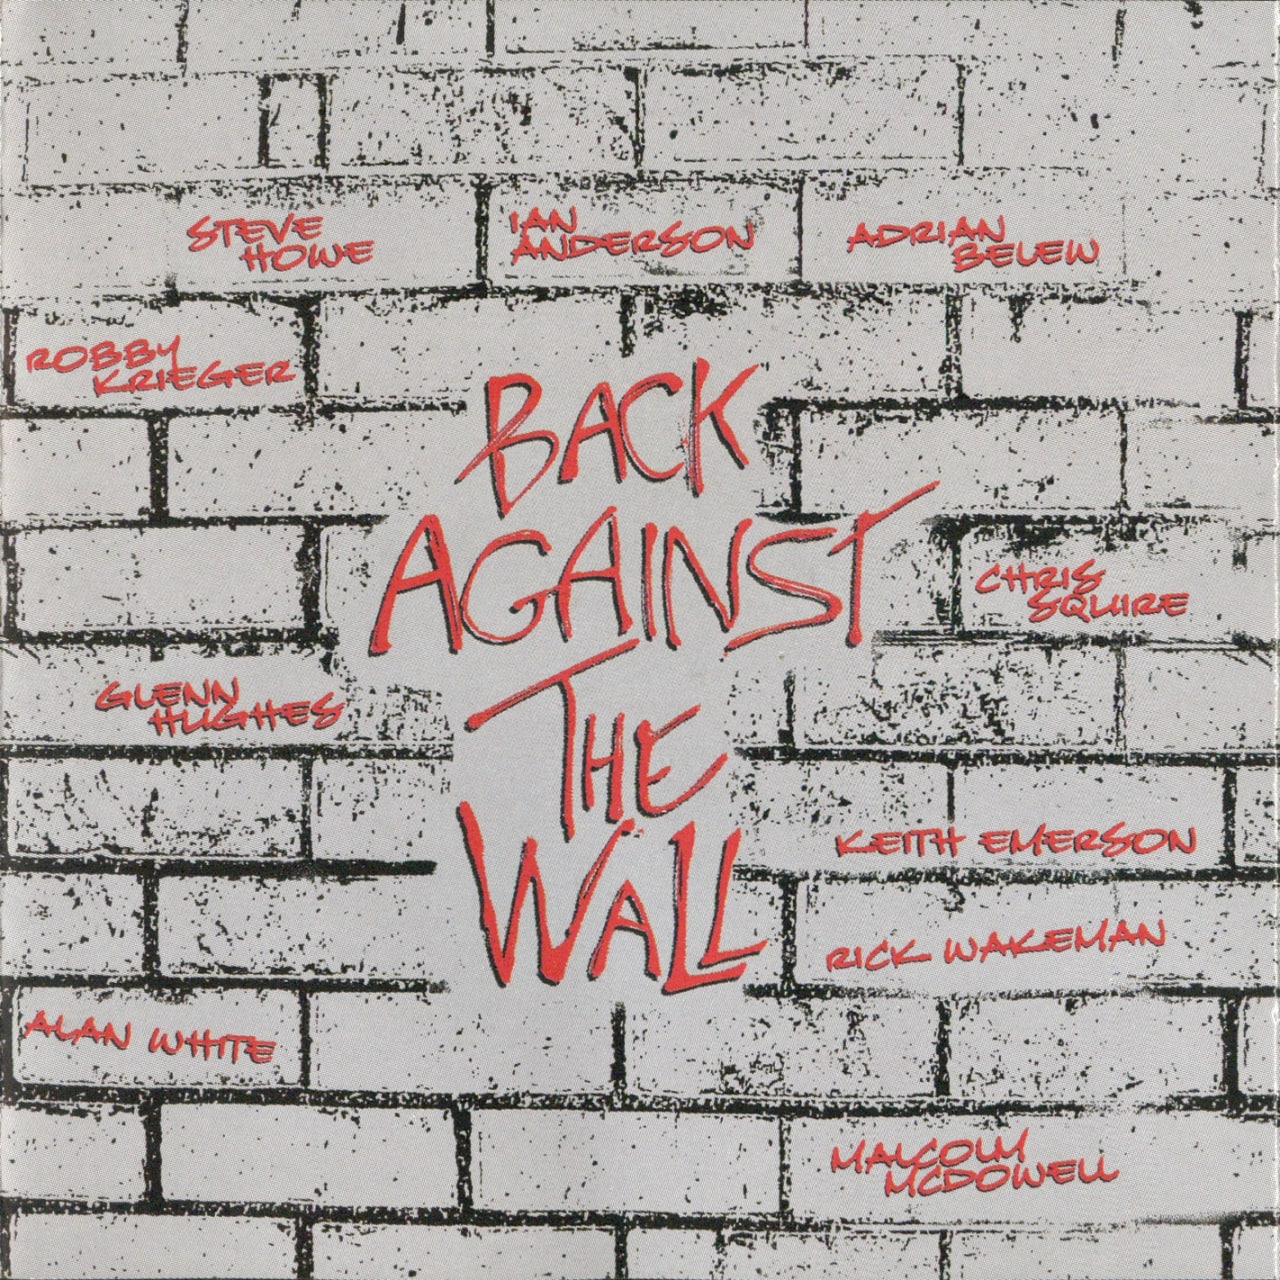 Walls cover. Back against the Wall Билли Шервуд. Pink Floyd the Wall обложка. Pink Floyd back against the Wall. Пинк Флойд стена.